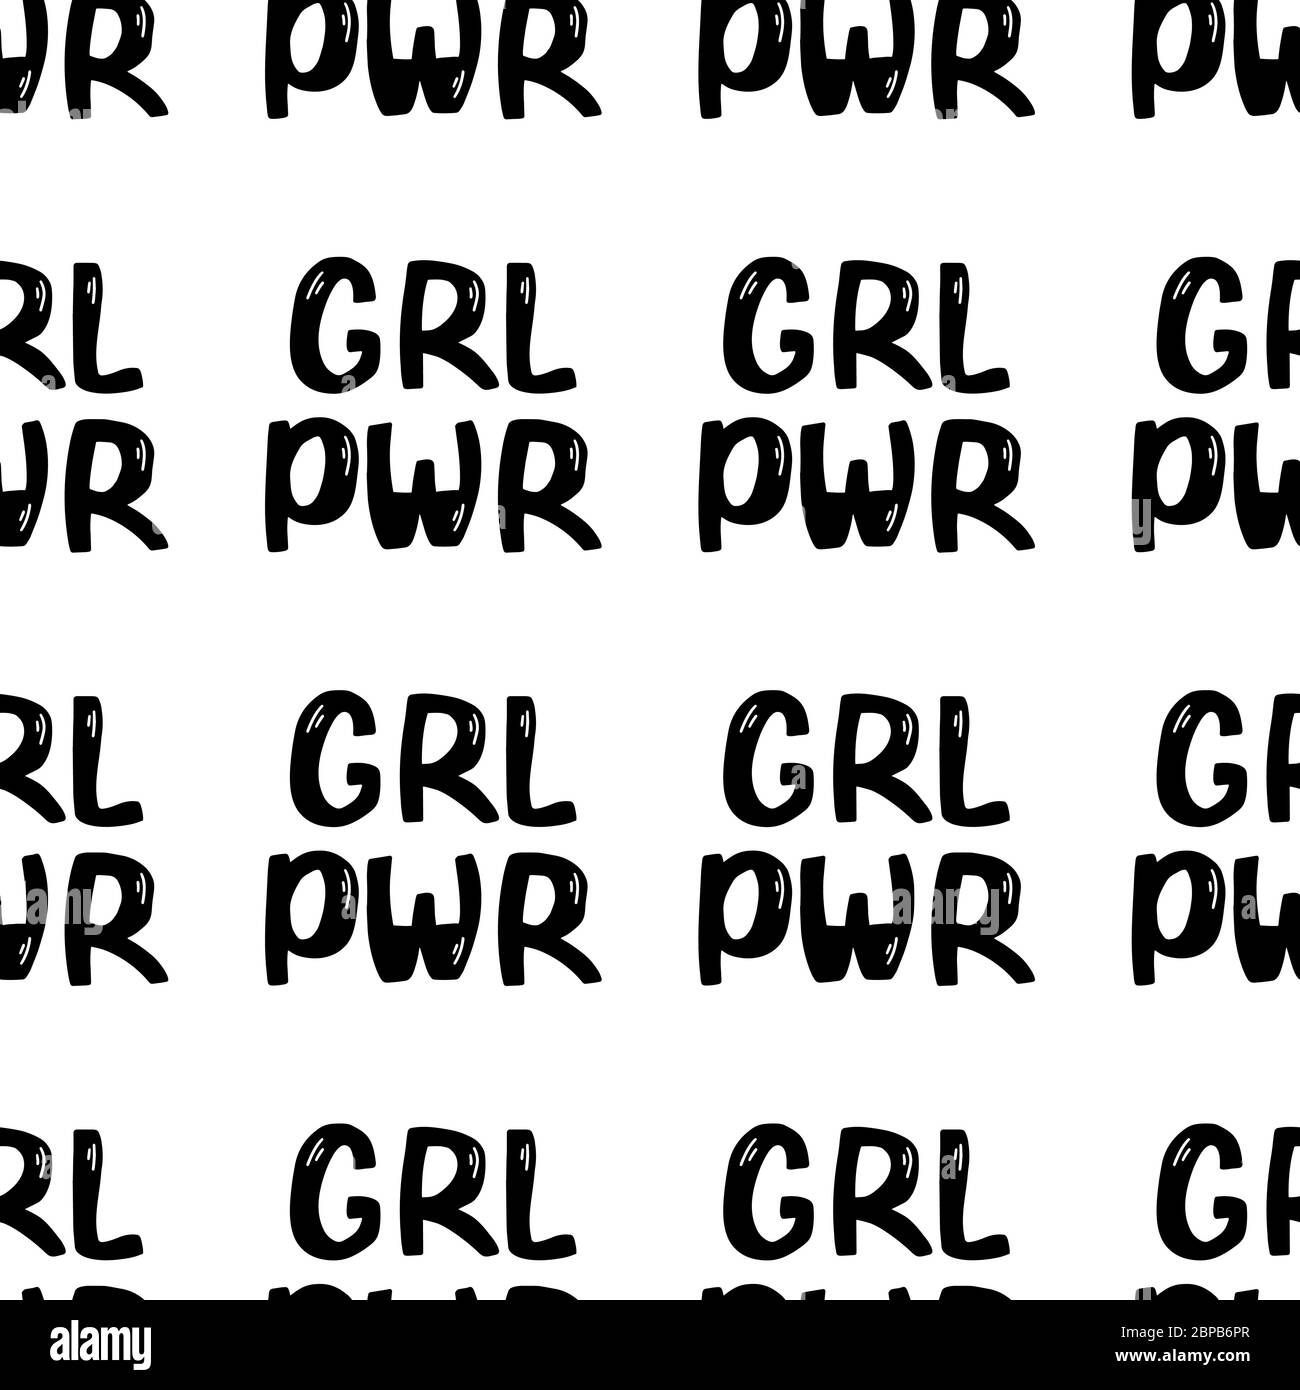 Seamless pattern made from grl pwr doodle lettering. Isolated on white background. Vector stock illustration. Stock Vector